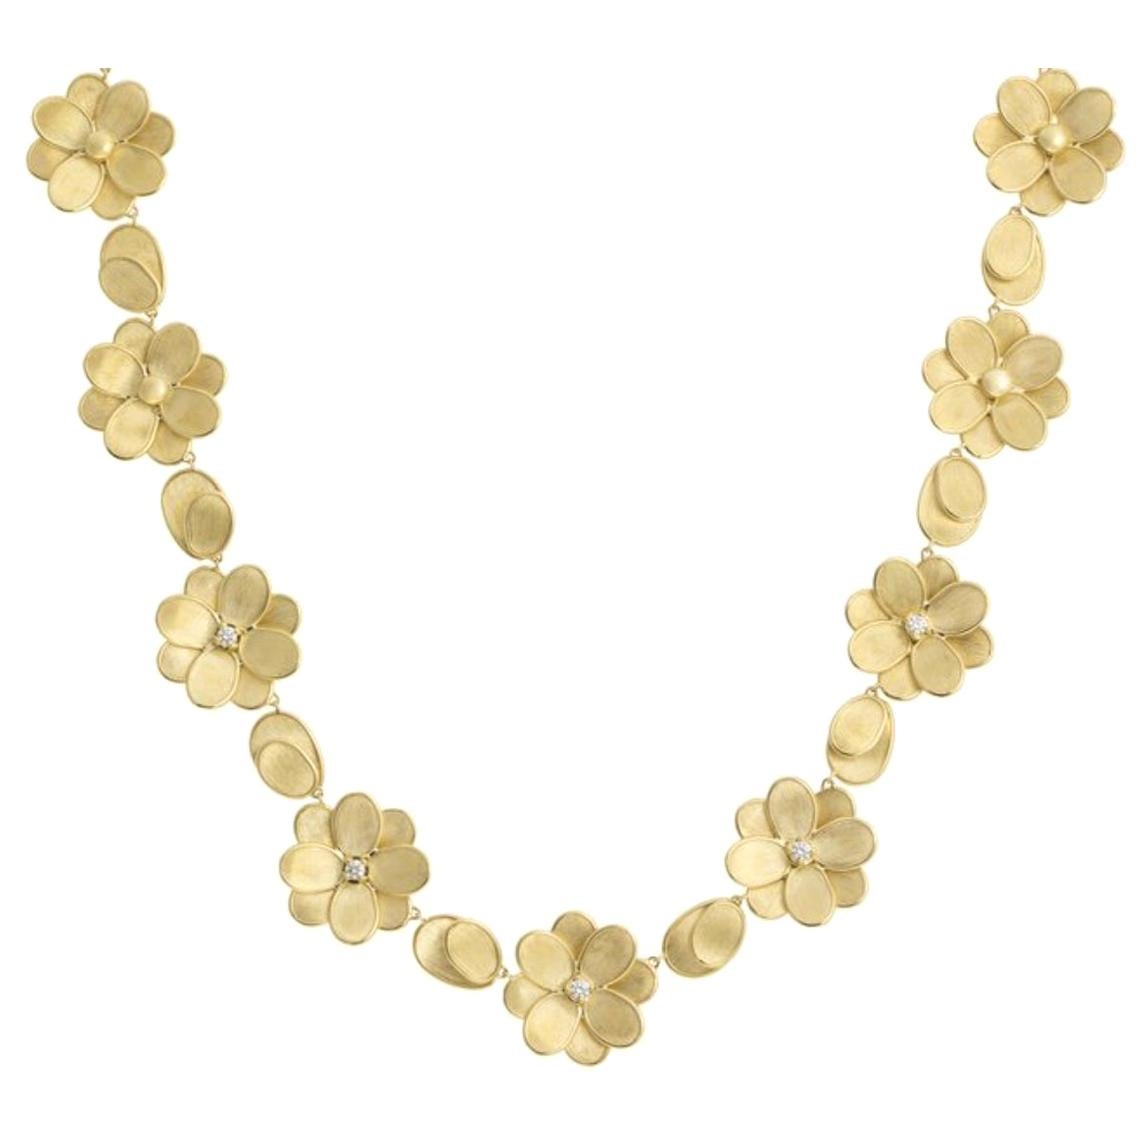 Marco Bicego® Petali Collection 18K Yellow Gold and Diamond Flower Collar
Length: 17.5